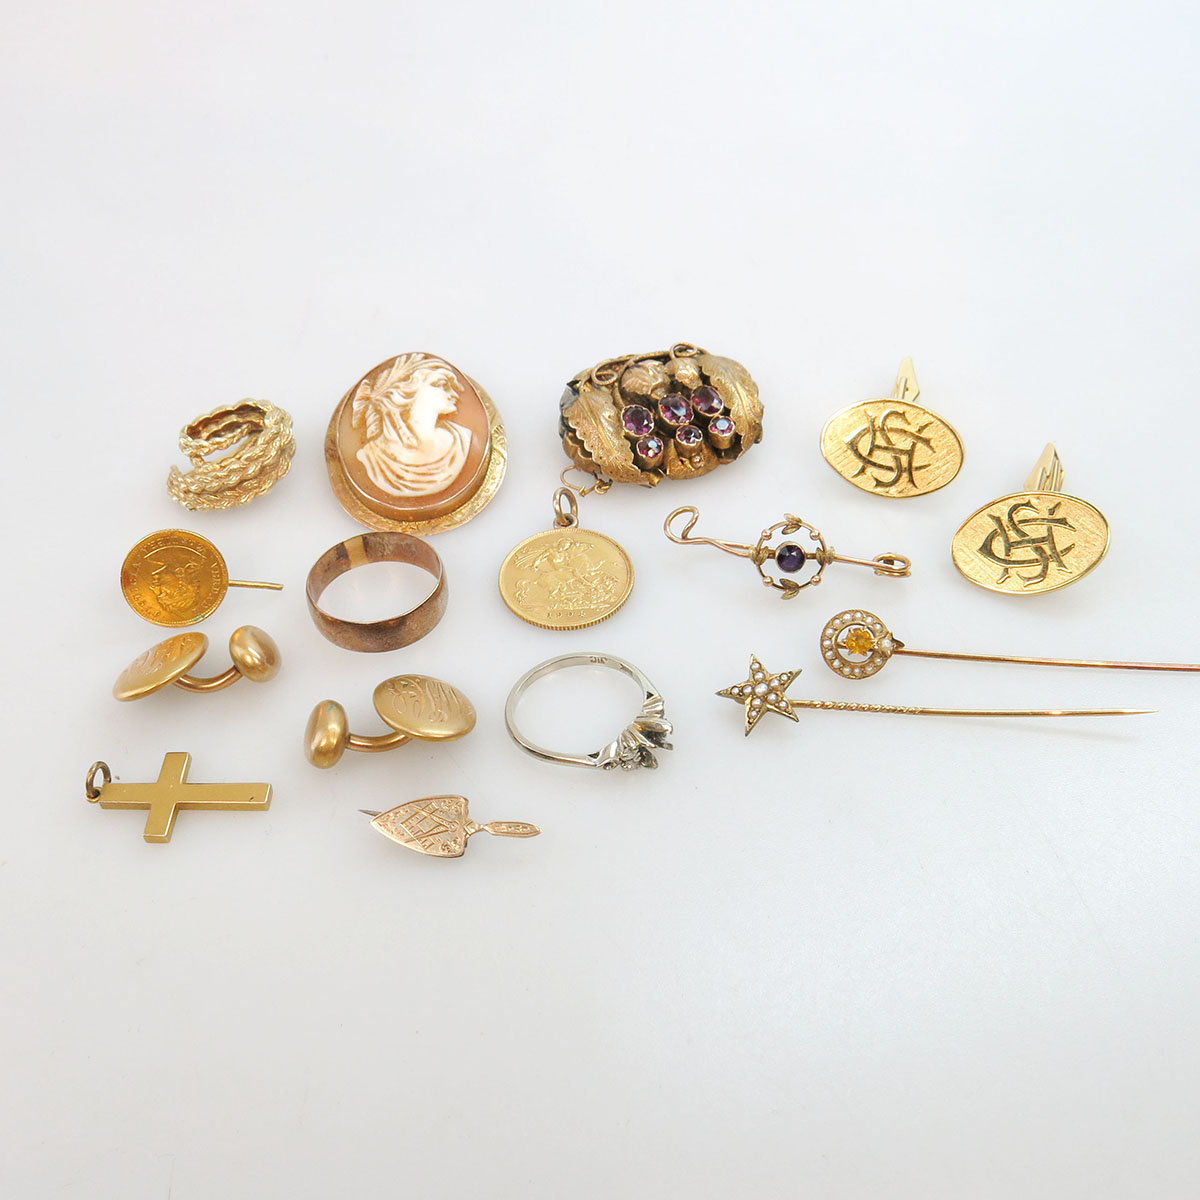 Small Quantity Of Various Gold Jewellery